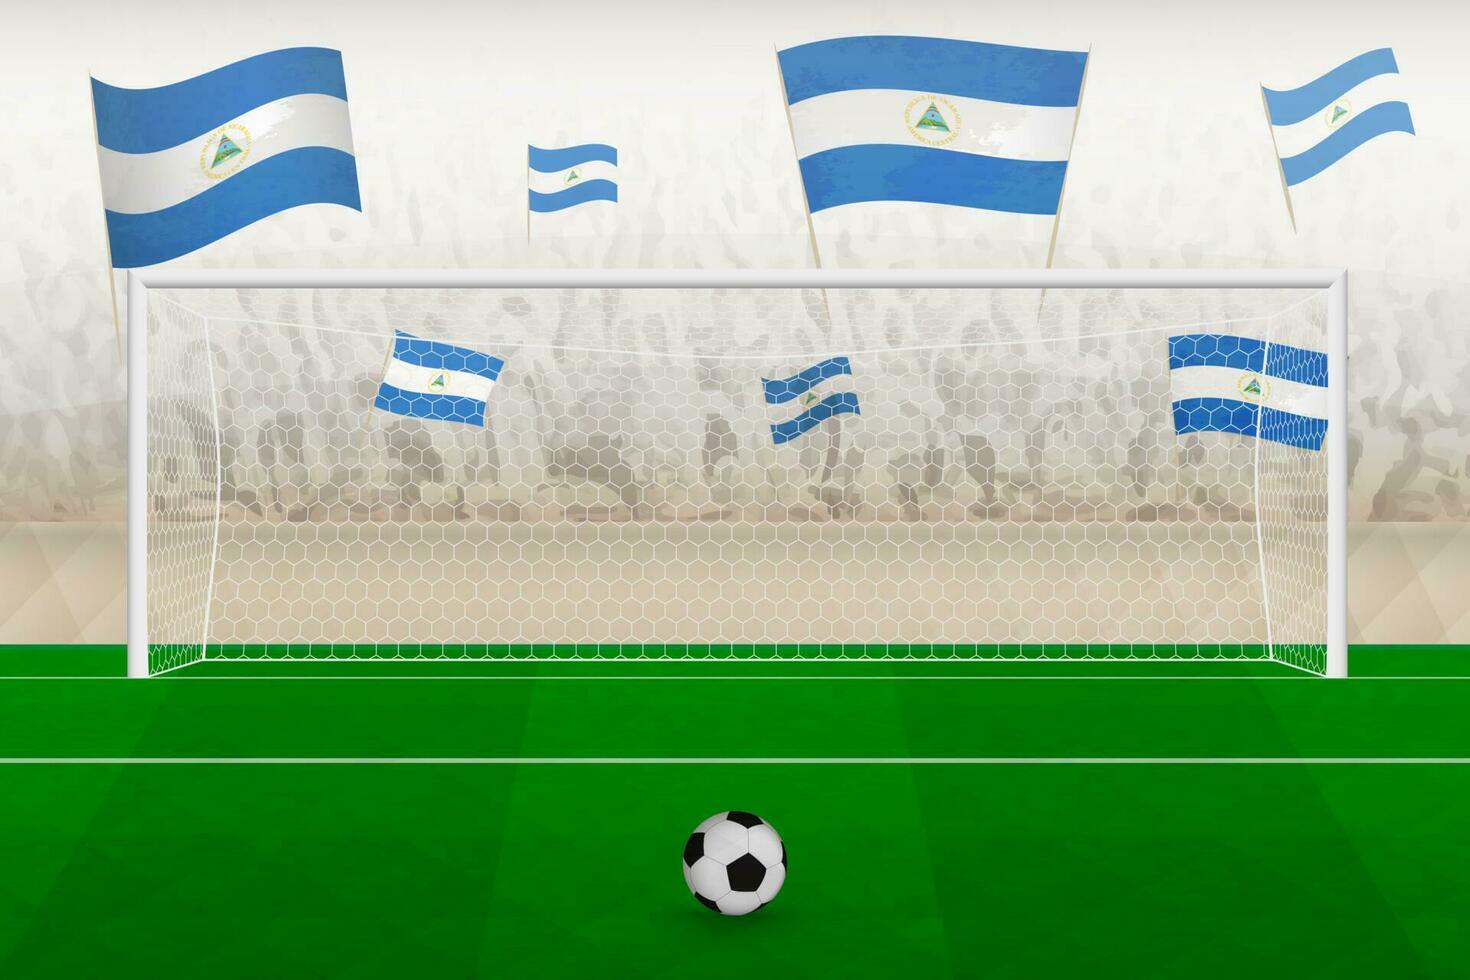 Nicaragua football team fans with flags of Nicaragua cheering on stadium, penalty kick concept in a soccer match. vector